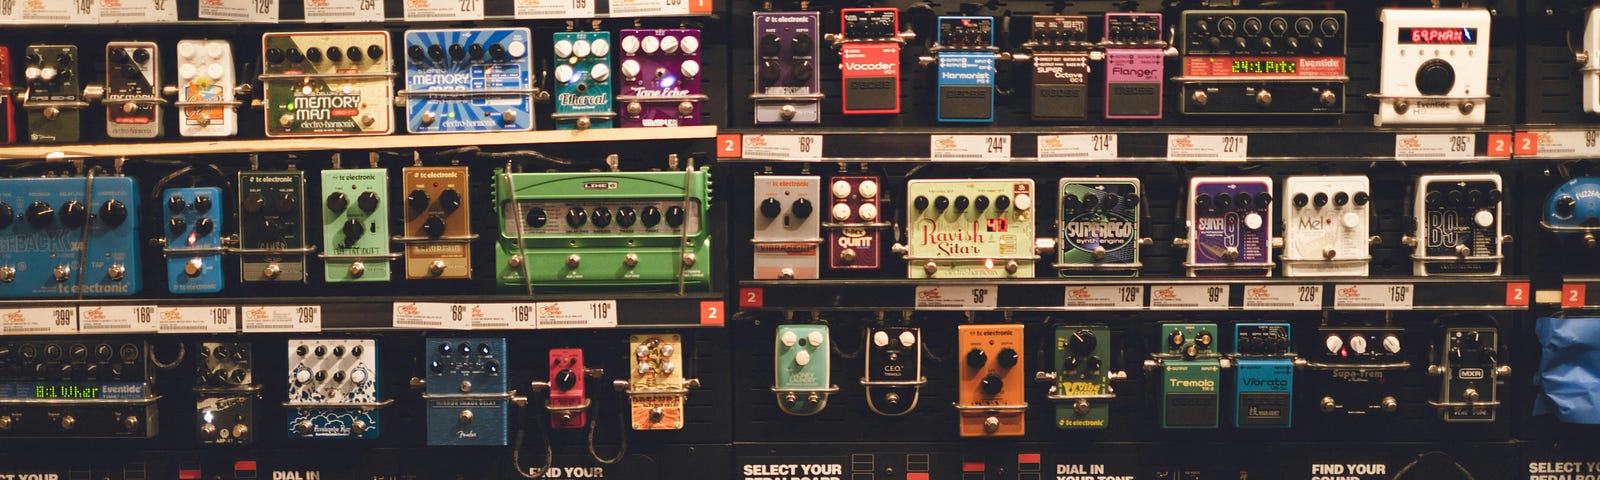 wall of guitar effects pedals